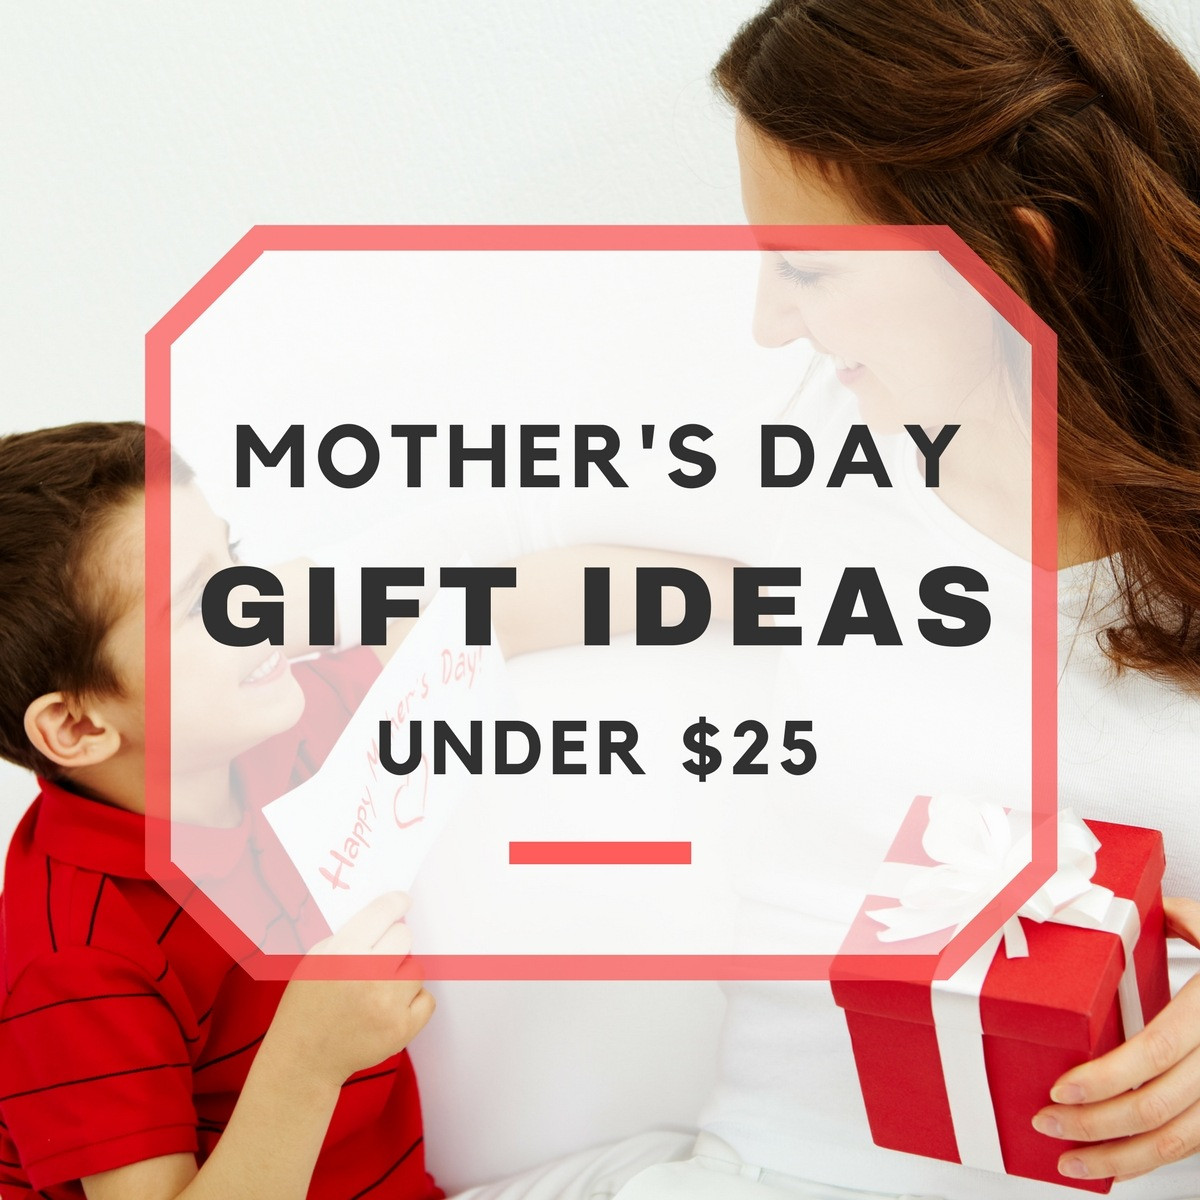 Awesome Mothers Day Gift Ideas 10 Good Mother s Day Gift Ideas Under $25